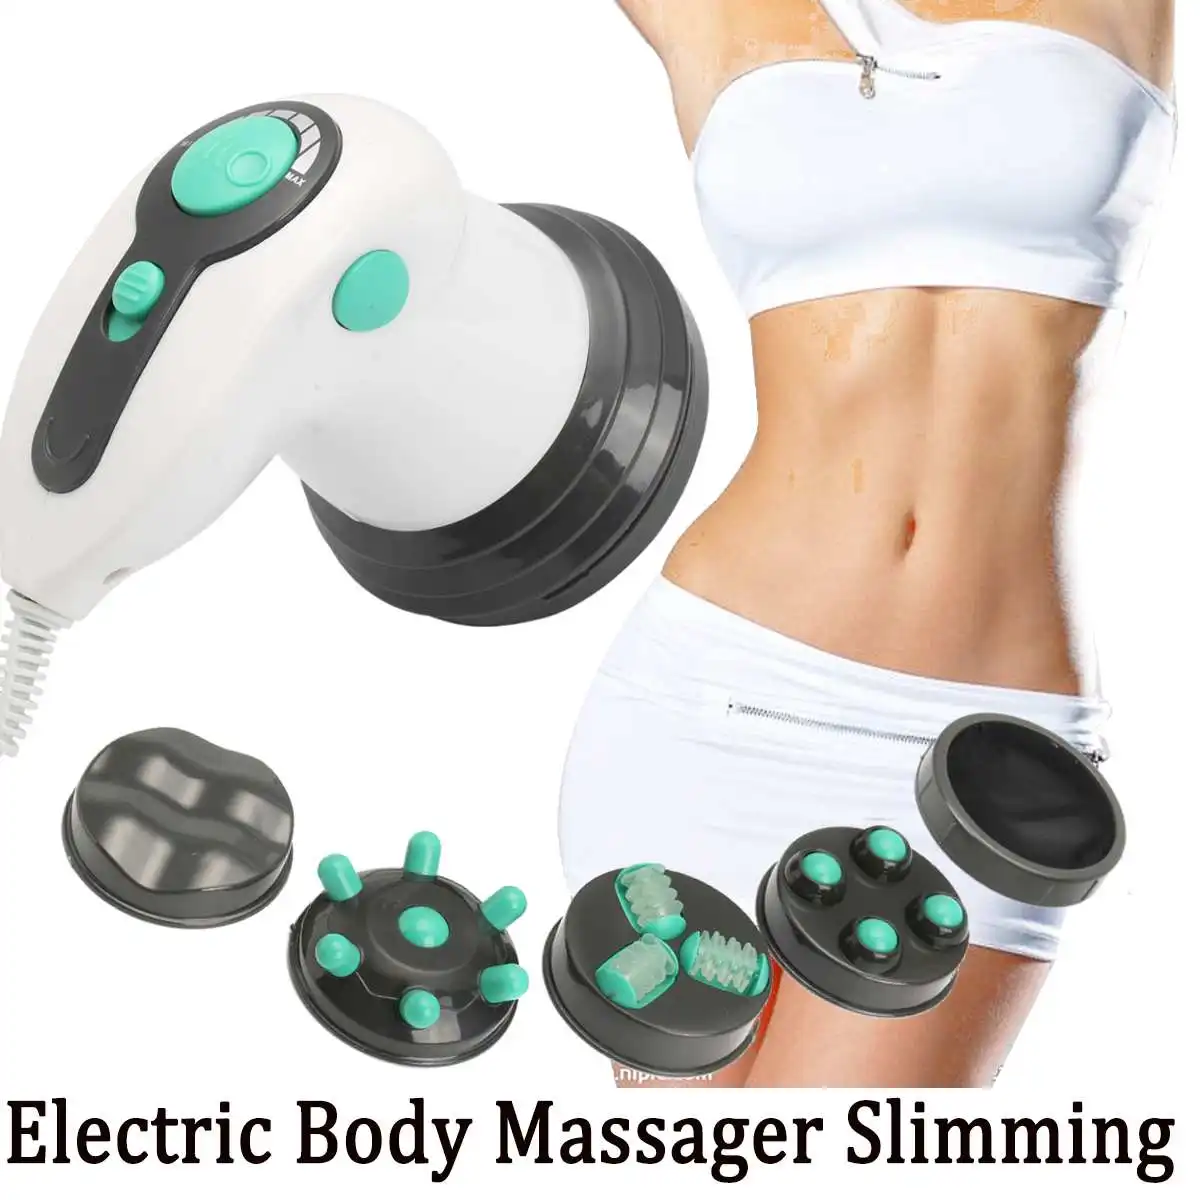 6 in 1 Cellulite Massager Handheld 3D Electric Body Slimming Massager for Arm Leg Hip Belly Weight Loss Fat Remove Roller